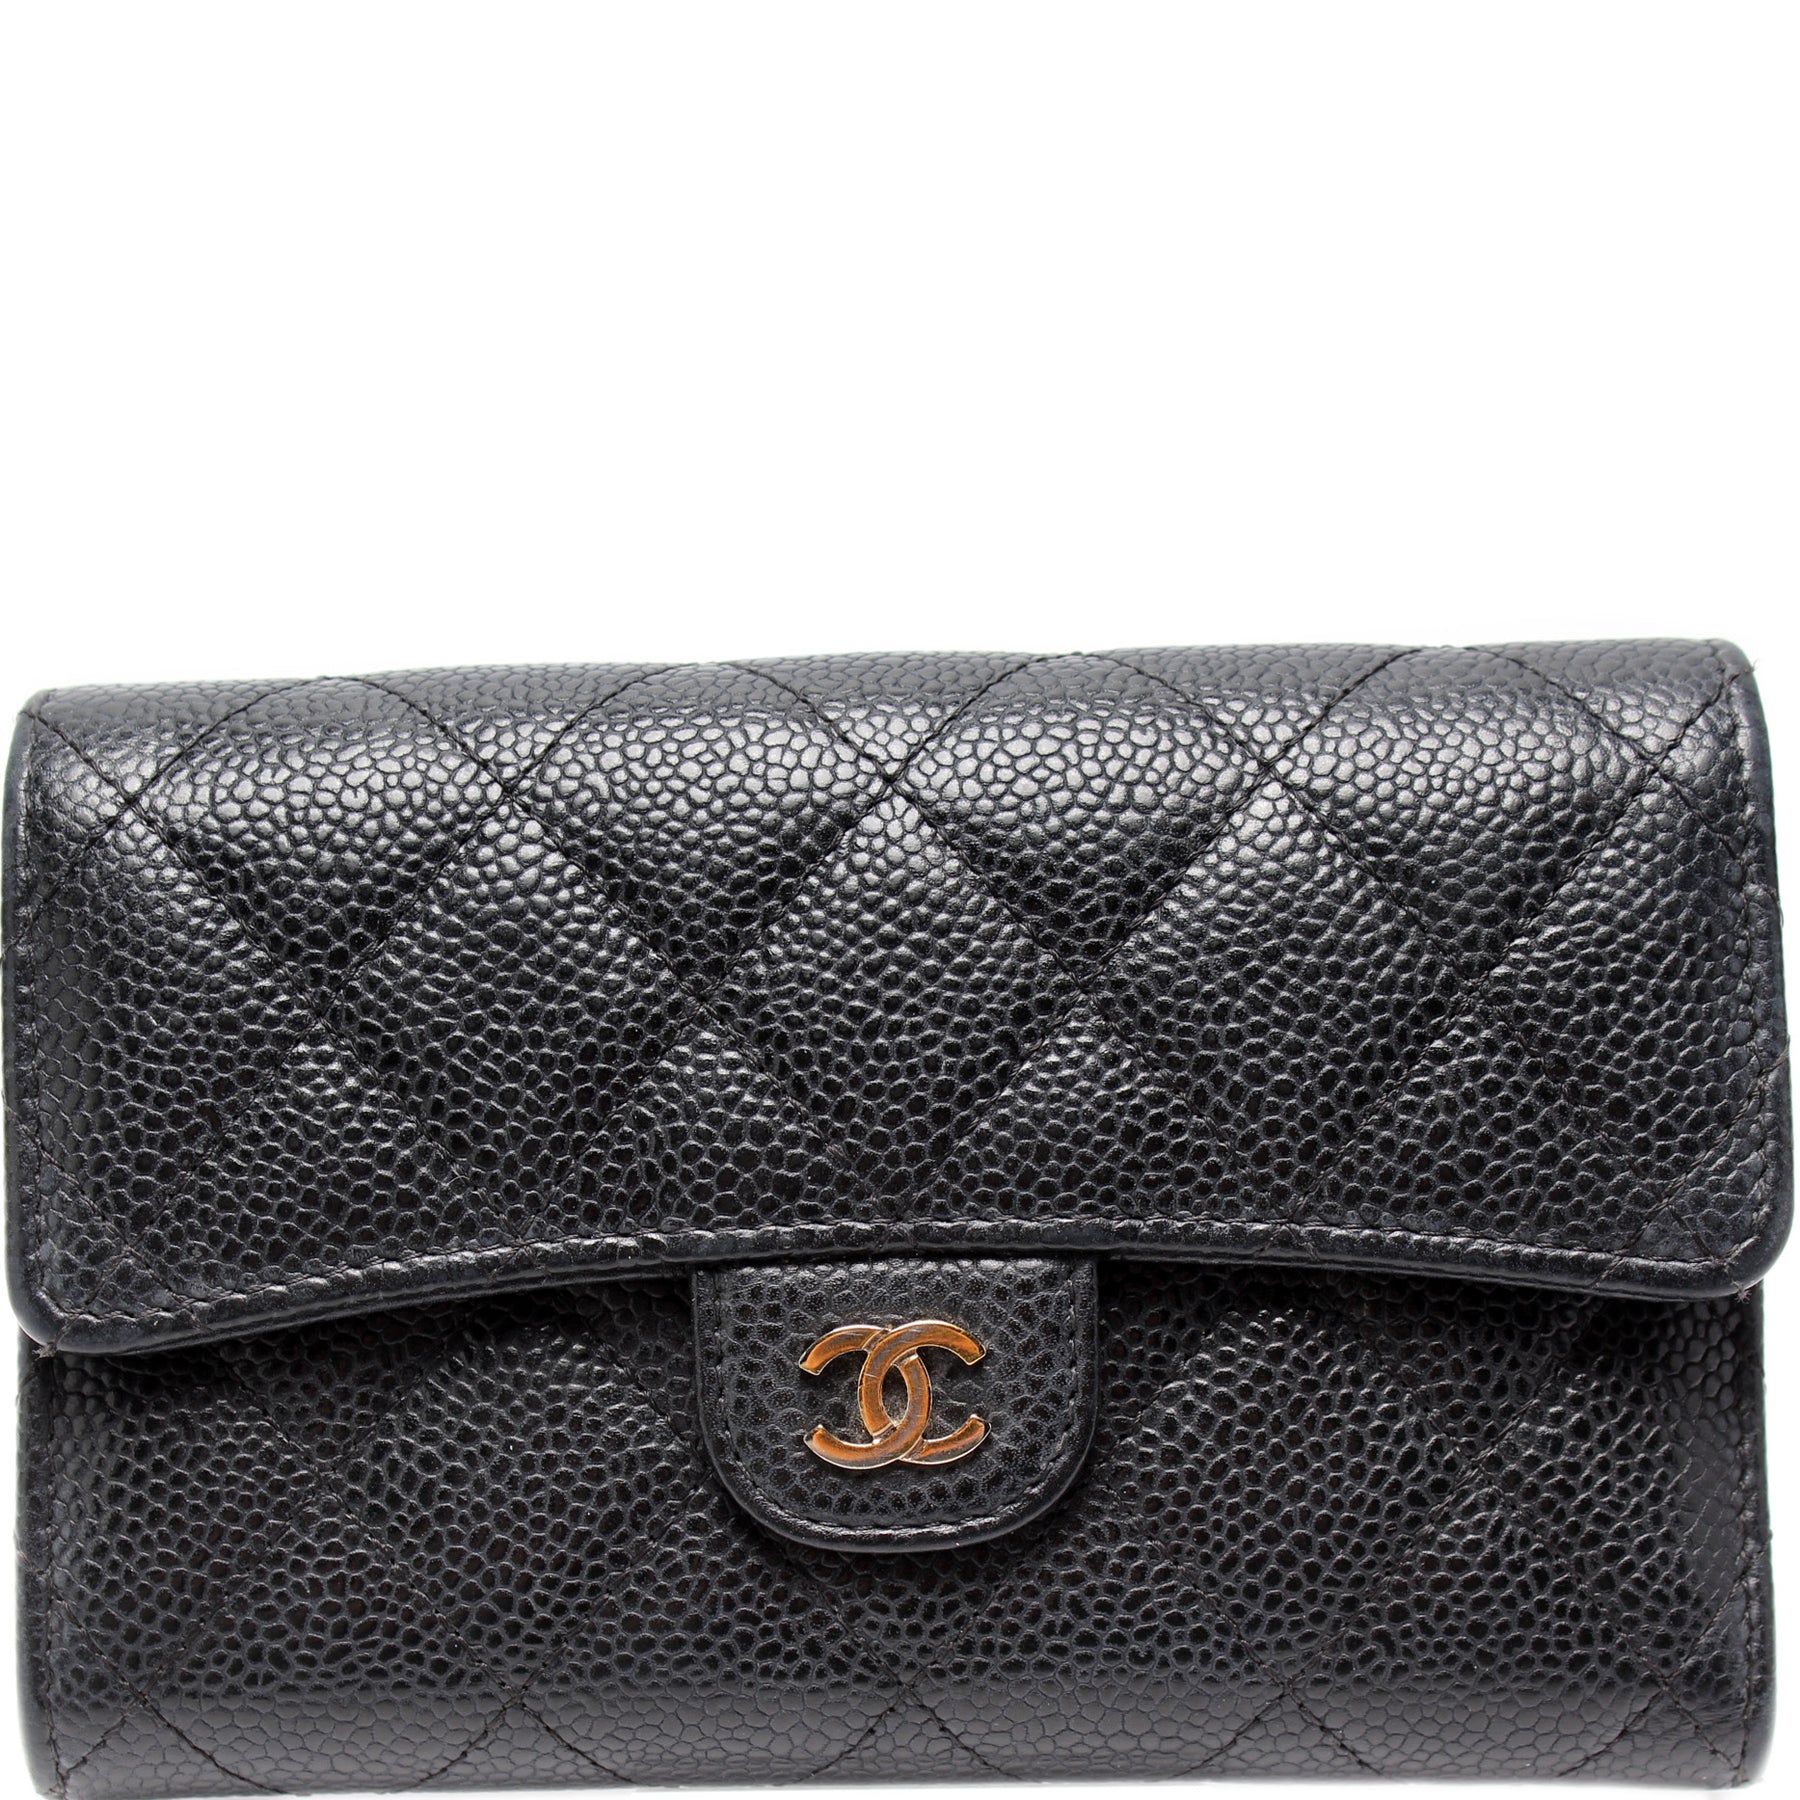 Chanel Small Classic Flap Wallet in Caviar Leather - 1 YEAR WEAR